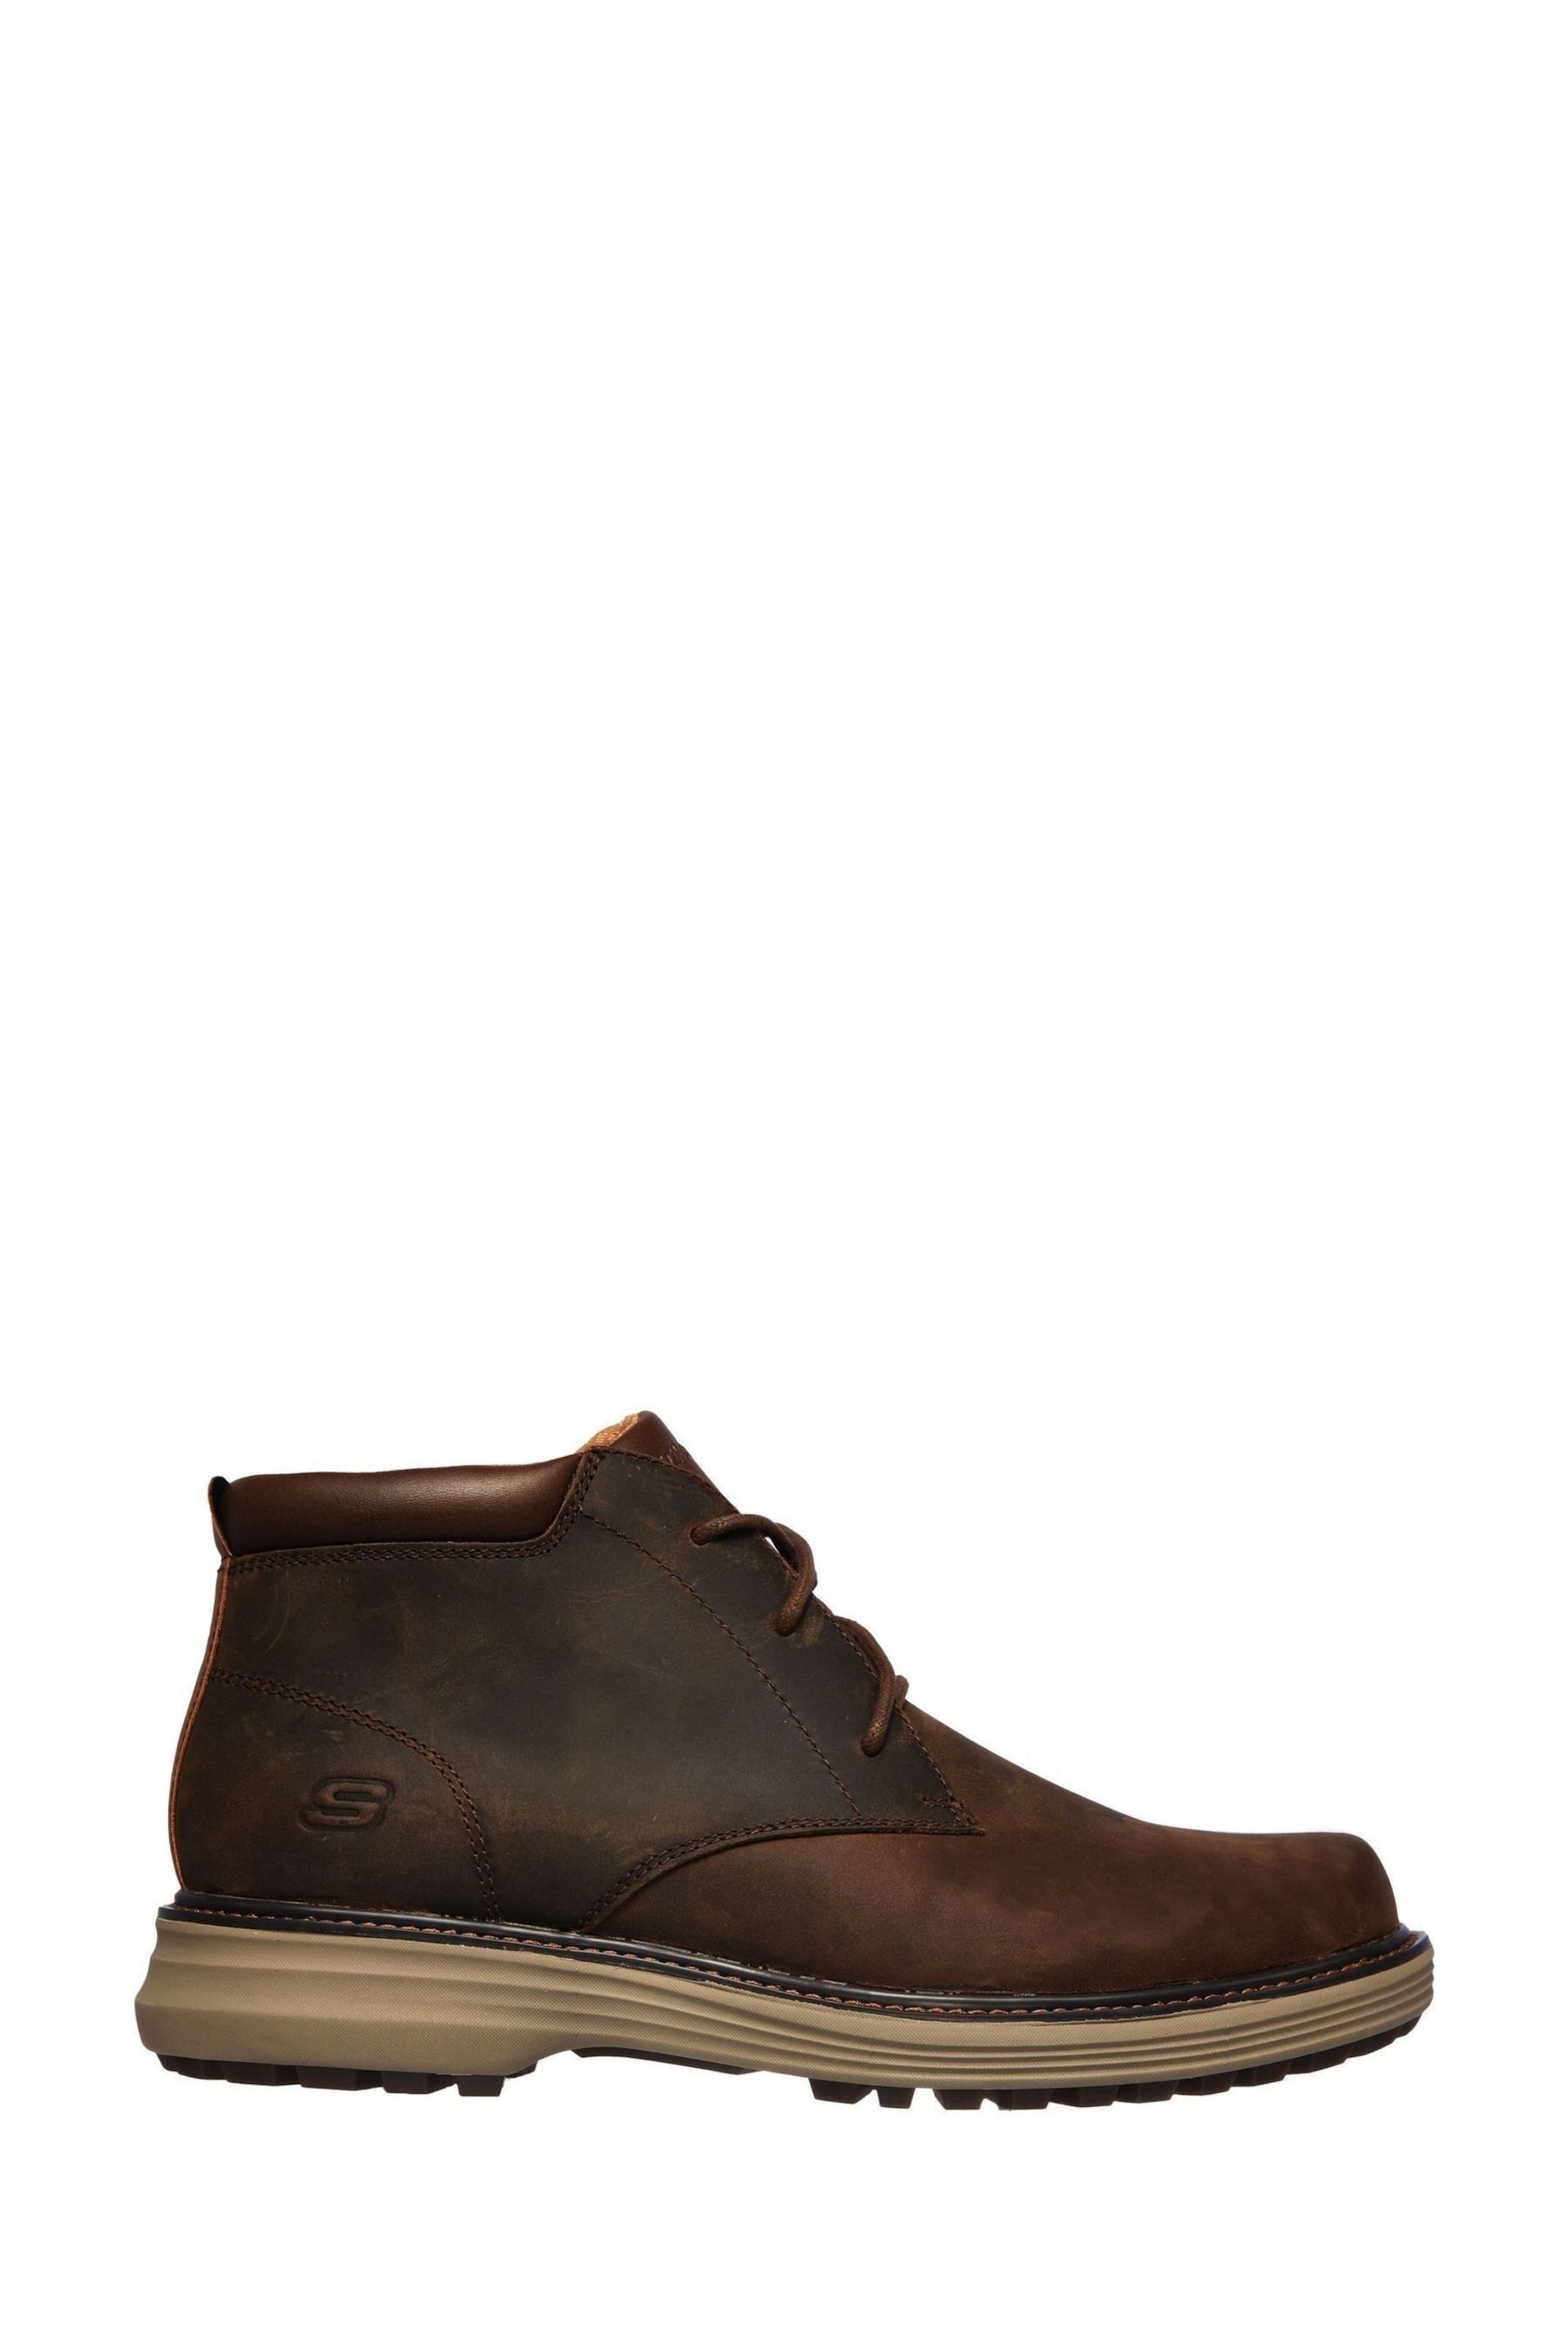 Skechers Brown Wenson Osteno Boots - Image 1 of 5